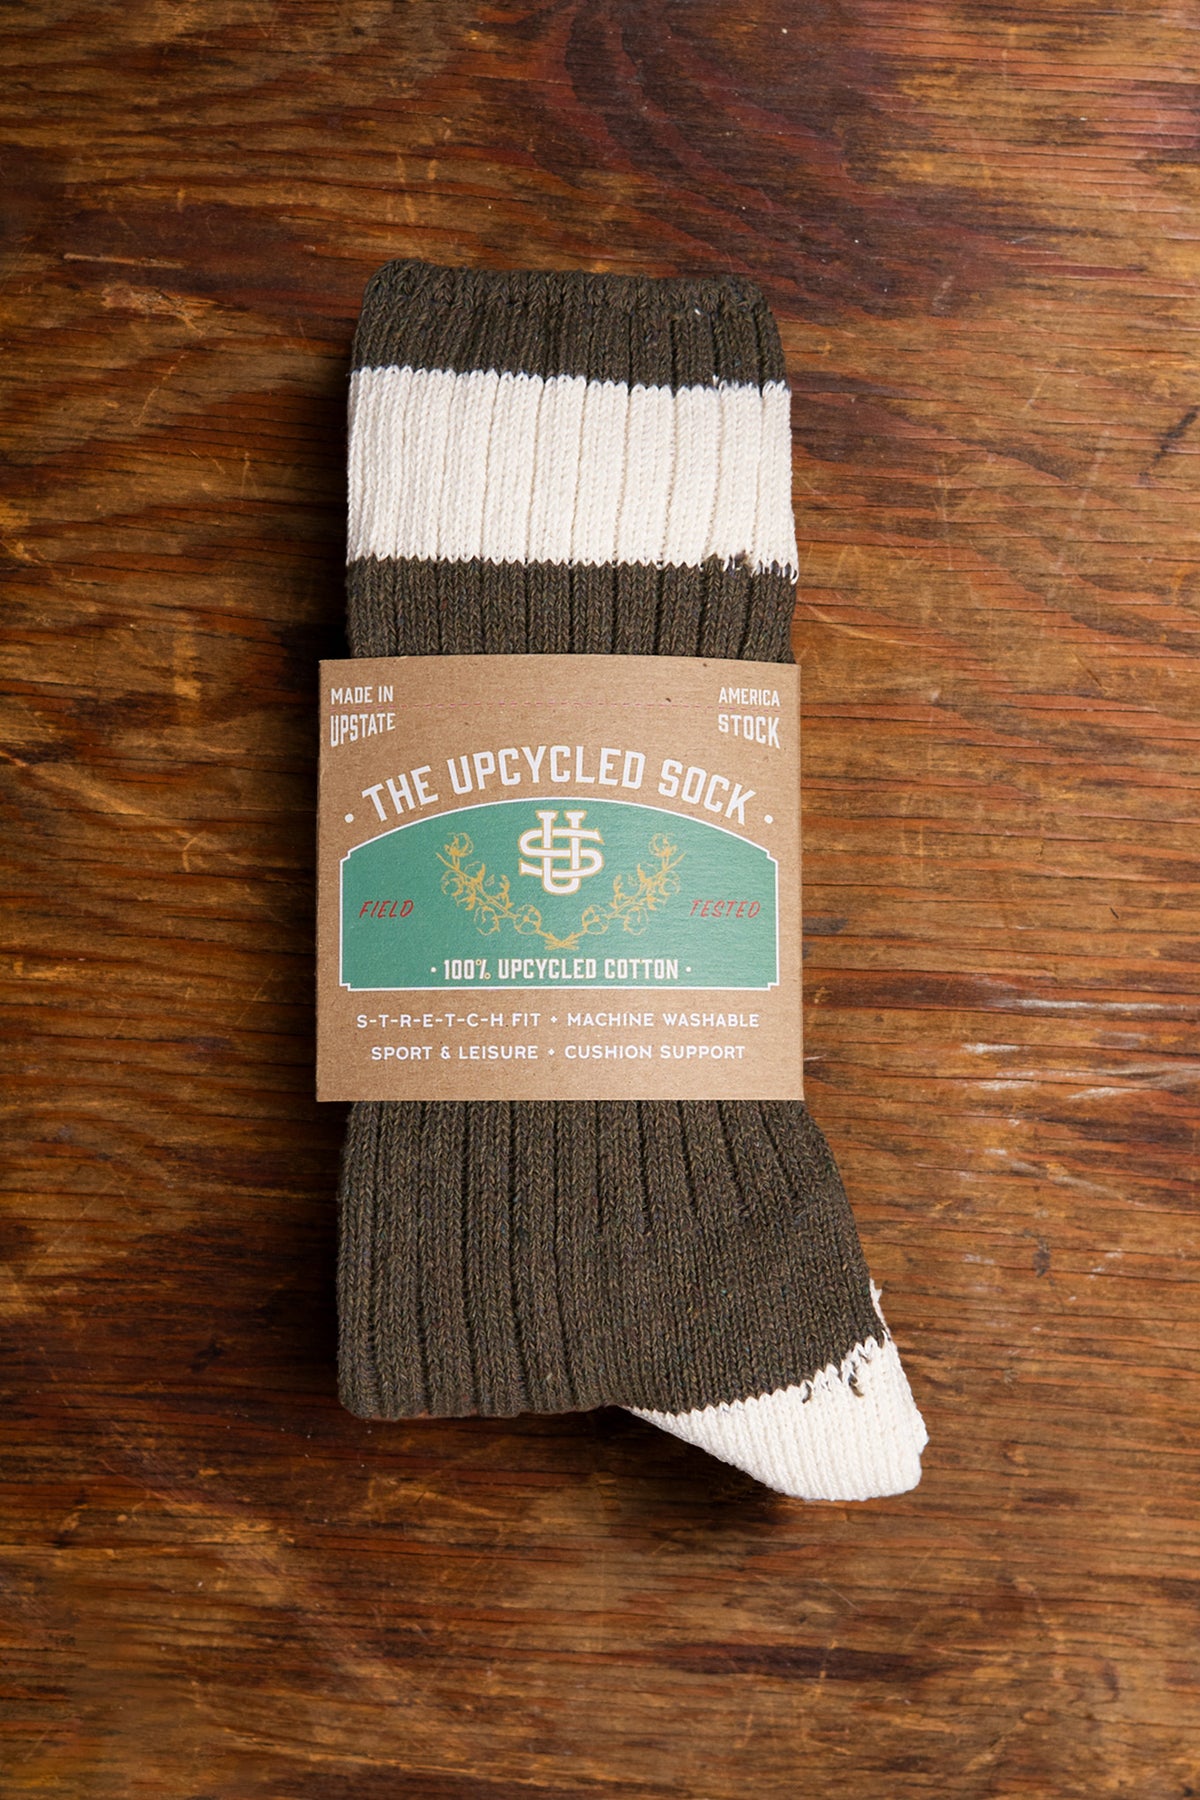 NEW The Upcycled Sock - Olive Drab